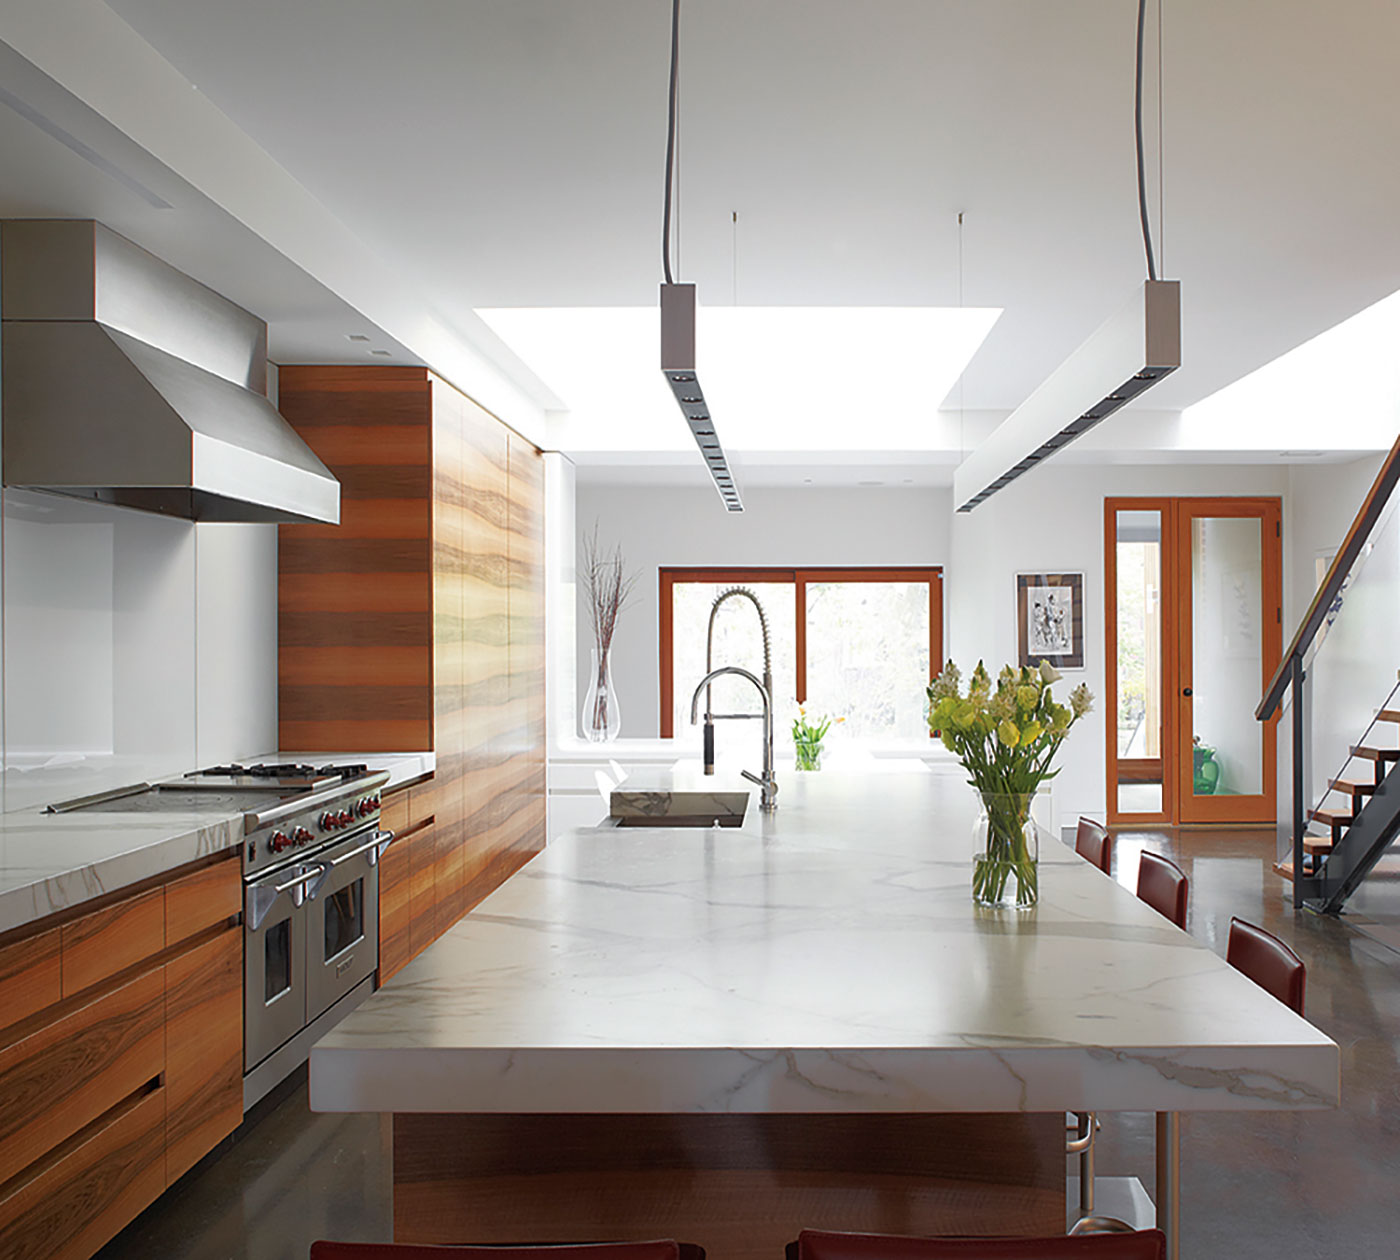 The kitchen’s book-matched wood grain, Carrera marble– topped island and thin suspension lights elongate the space.